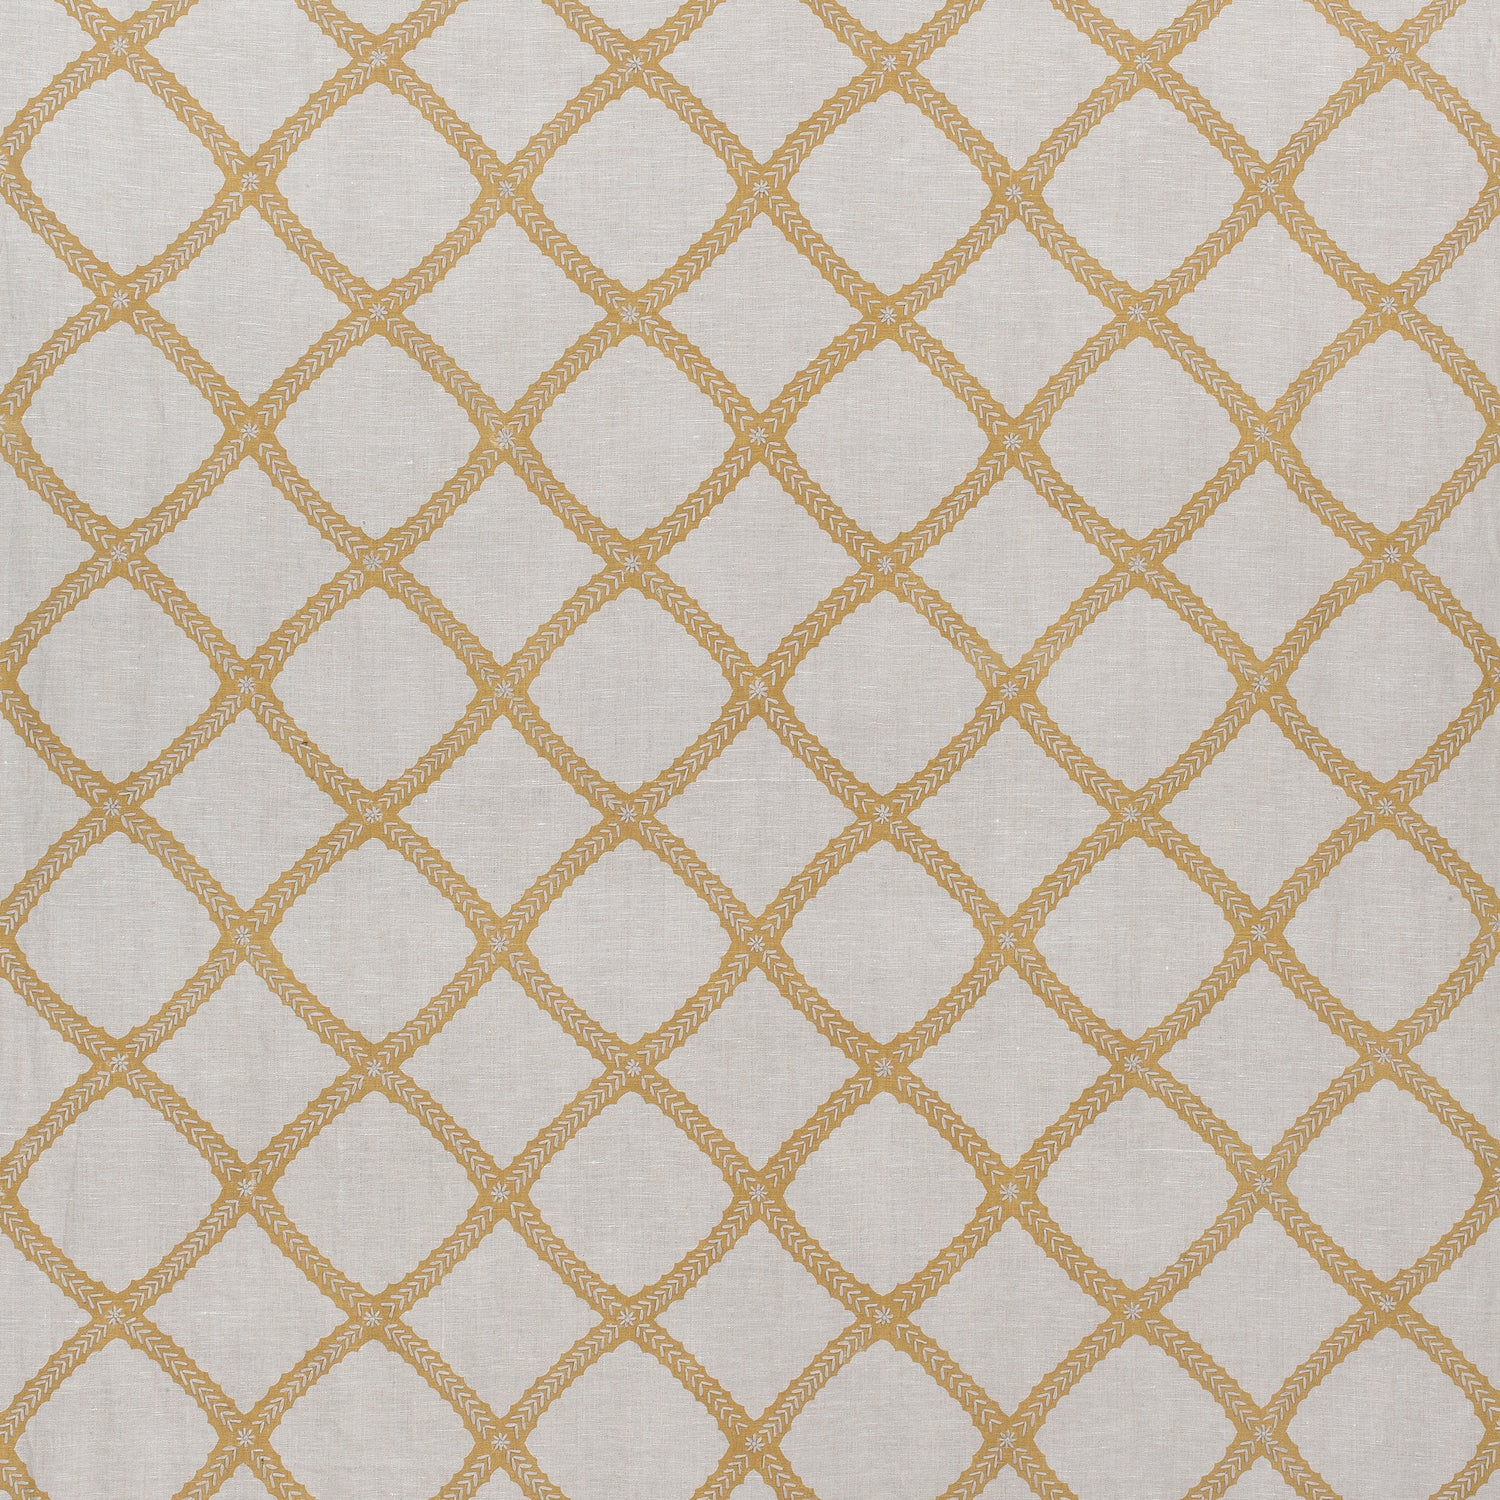 Majuli Embroidery fabric in gold on flax color - pattern number W788708 - by Thibaut in the Trade Routes collection